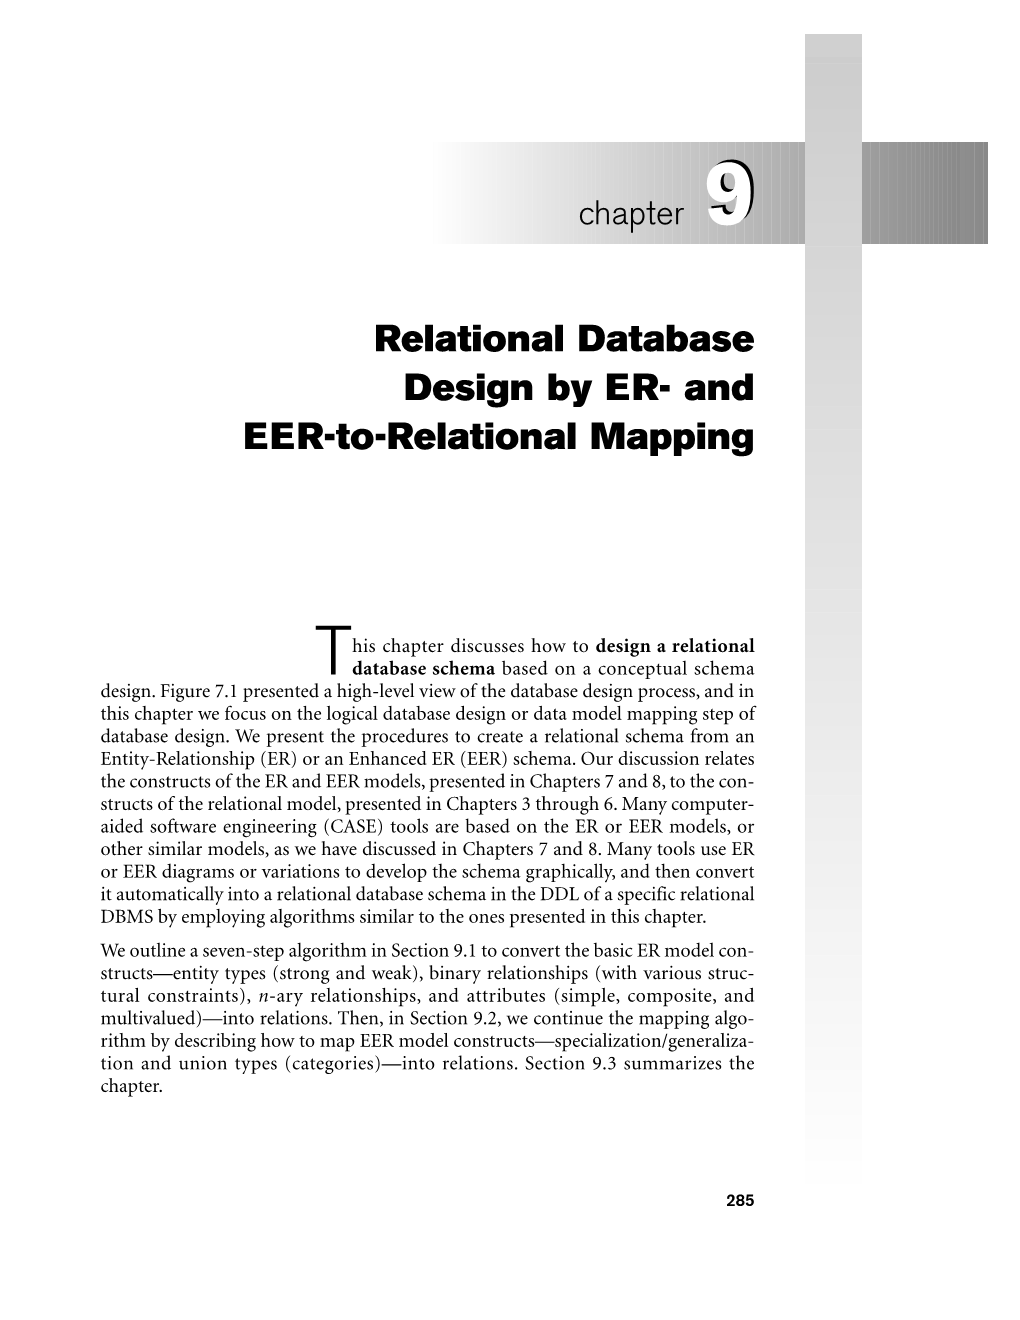 Relational Database Design by ER- and EER-To-Relational Mapping